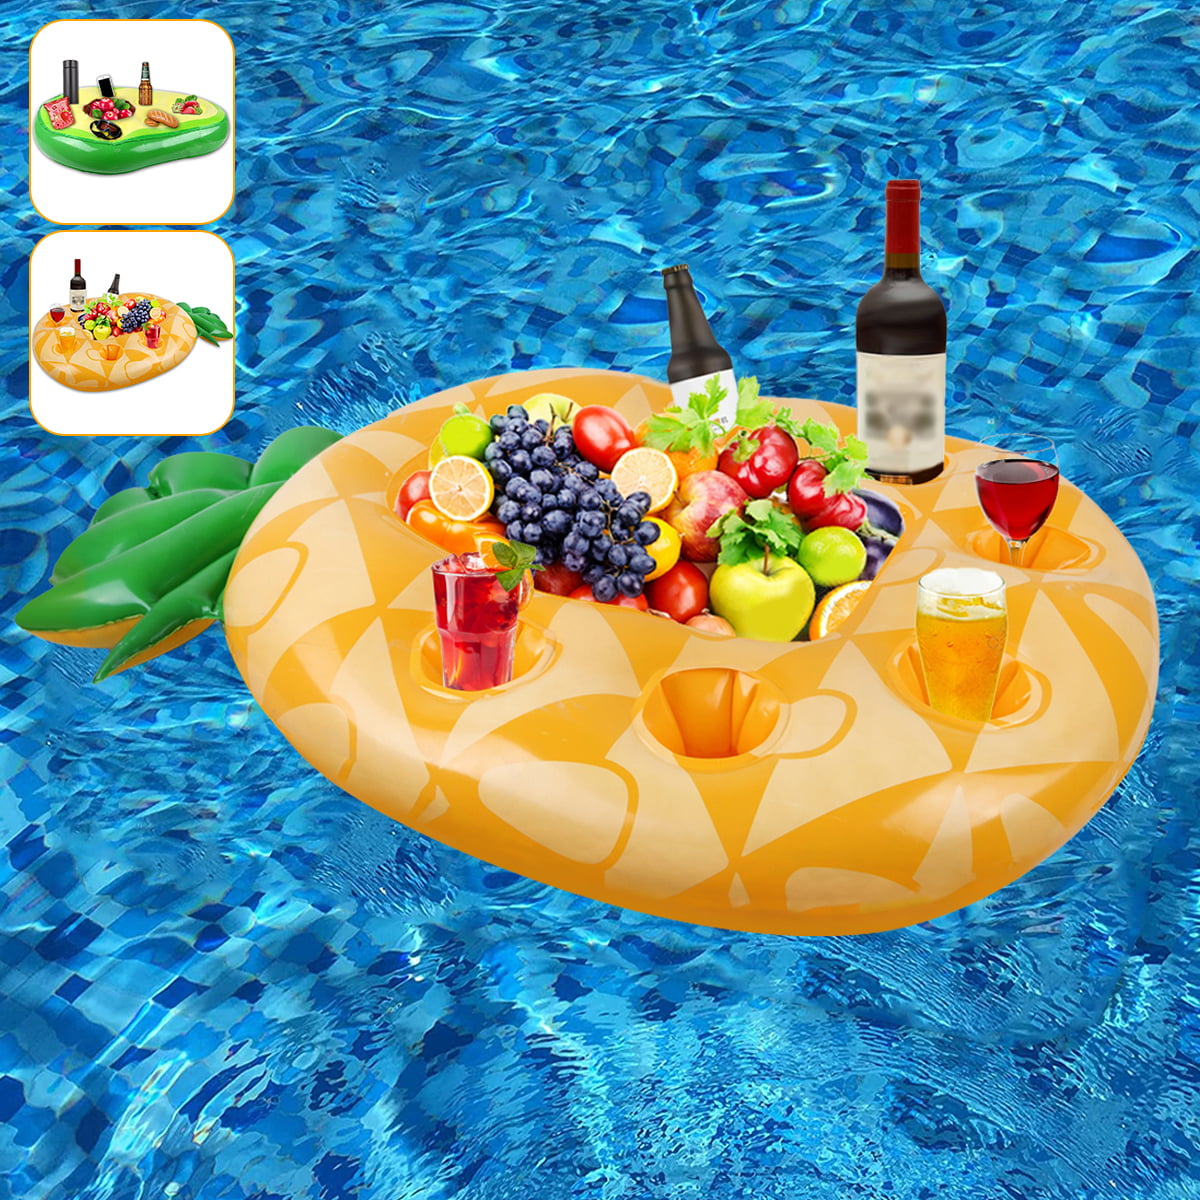 Inflatable Pool Float Tray with Cupholder SNACKS DRINKS FUN OUTDOOR Spa life NEW 